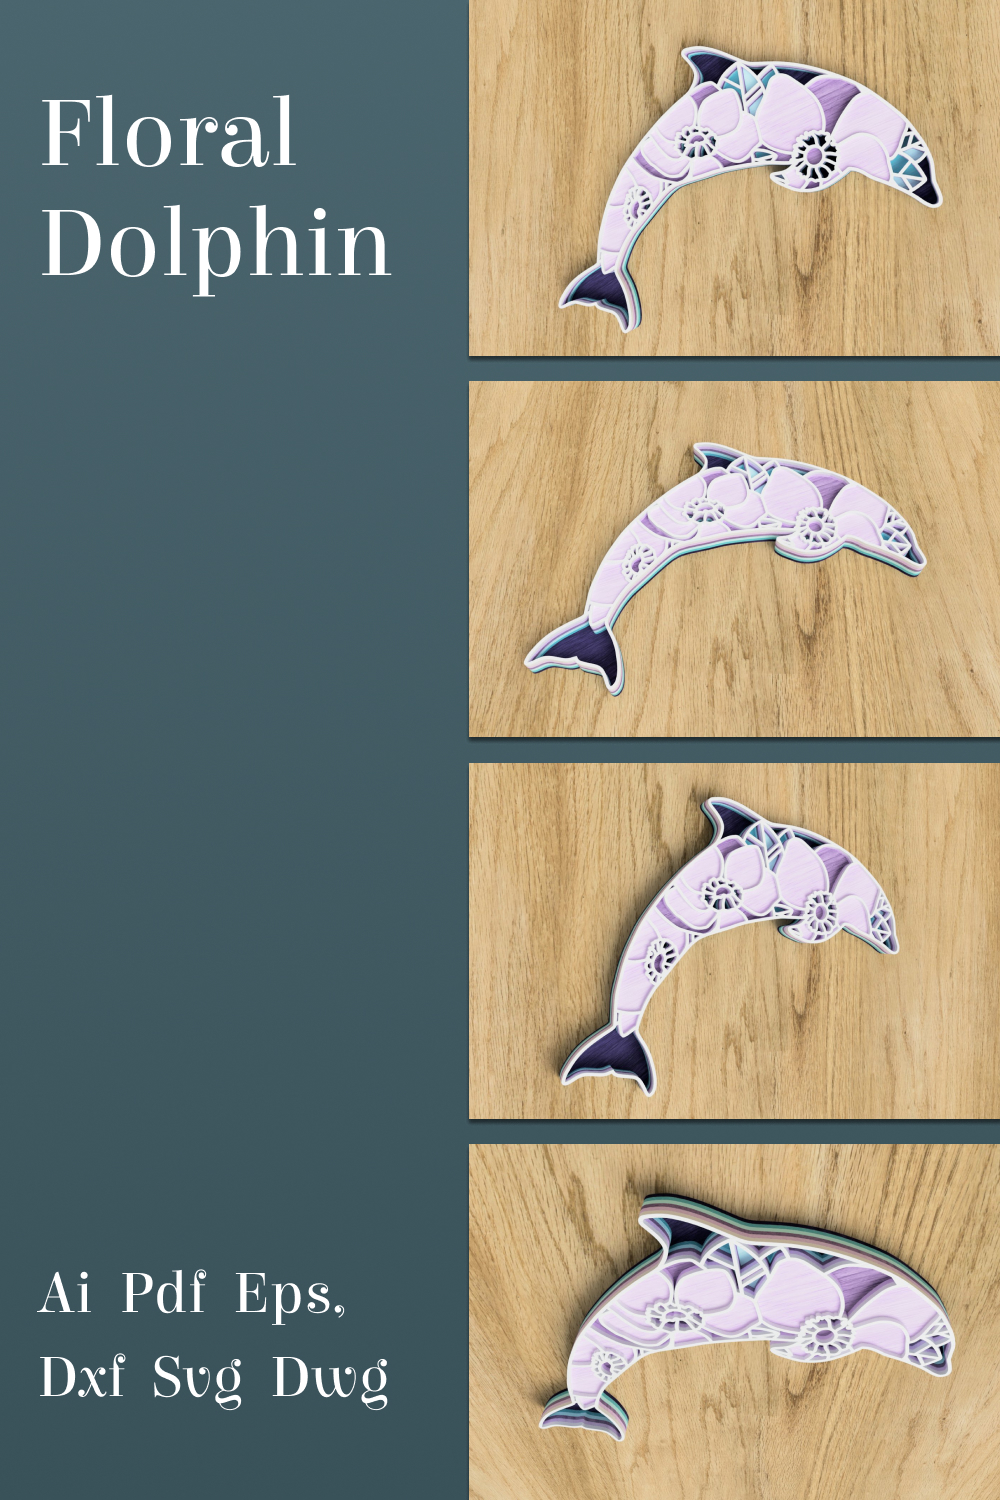 Three dolphins cut out of paper sitting on top of a wooden table.